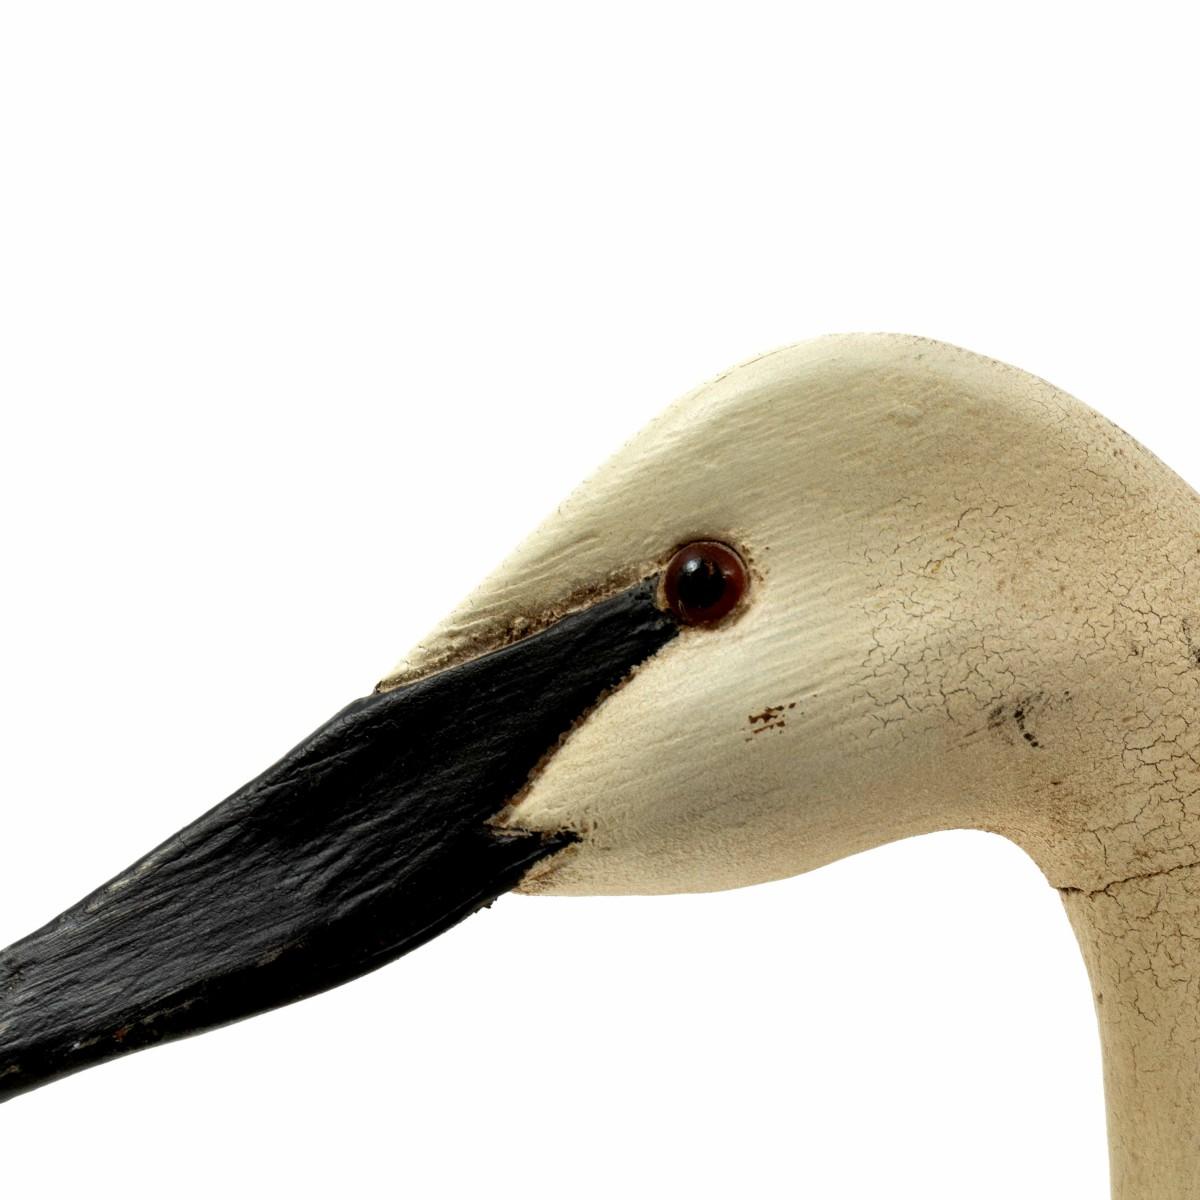 A large white painted wood swan decoy with black beak by American folk artist Thomas Langan, Roslyn Harbor, NY. 20th Century.

Dimensions: 
22 inches L x 4.7 inches D x 12.2 inches L